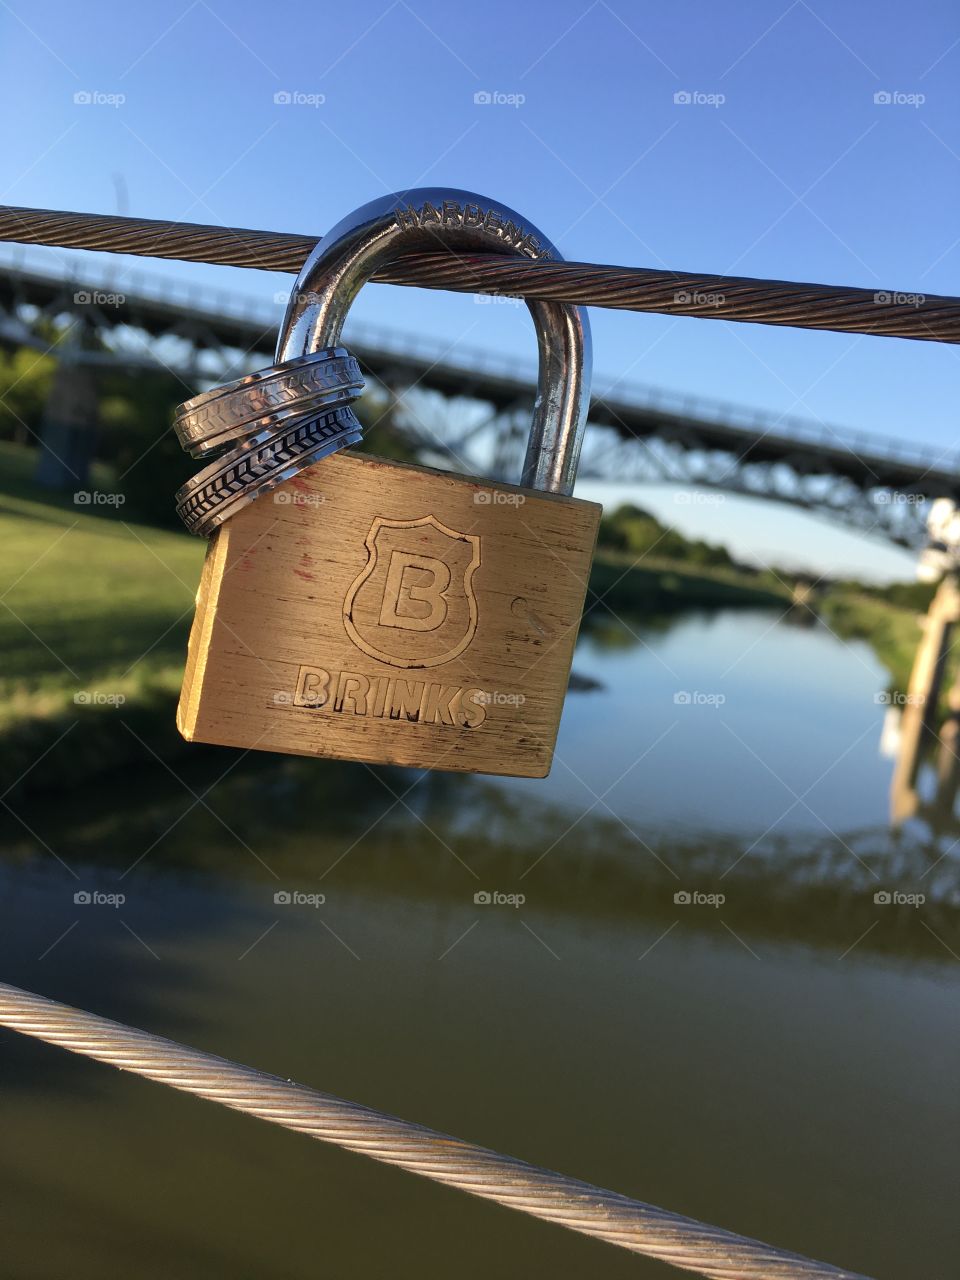 Rings on a padlock found attached to a bridge. 